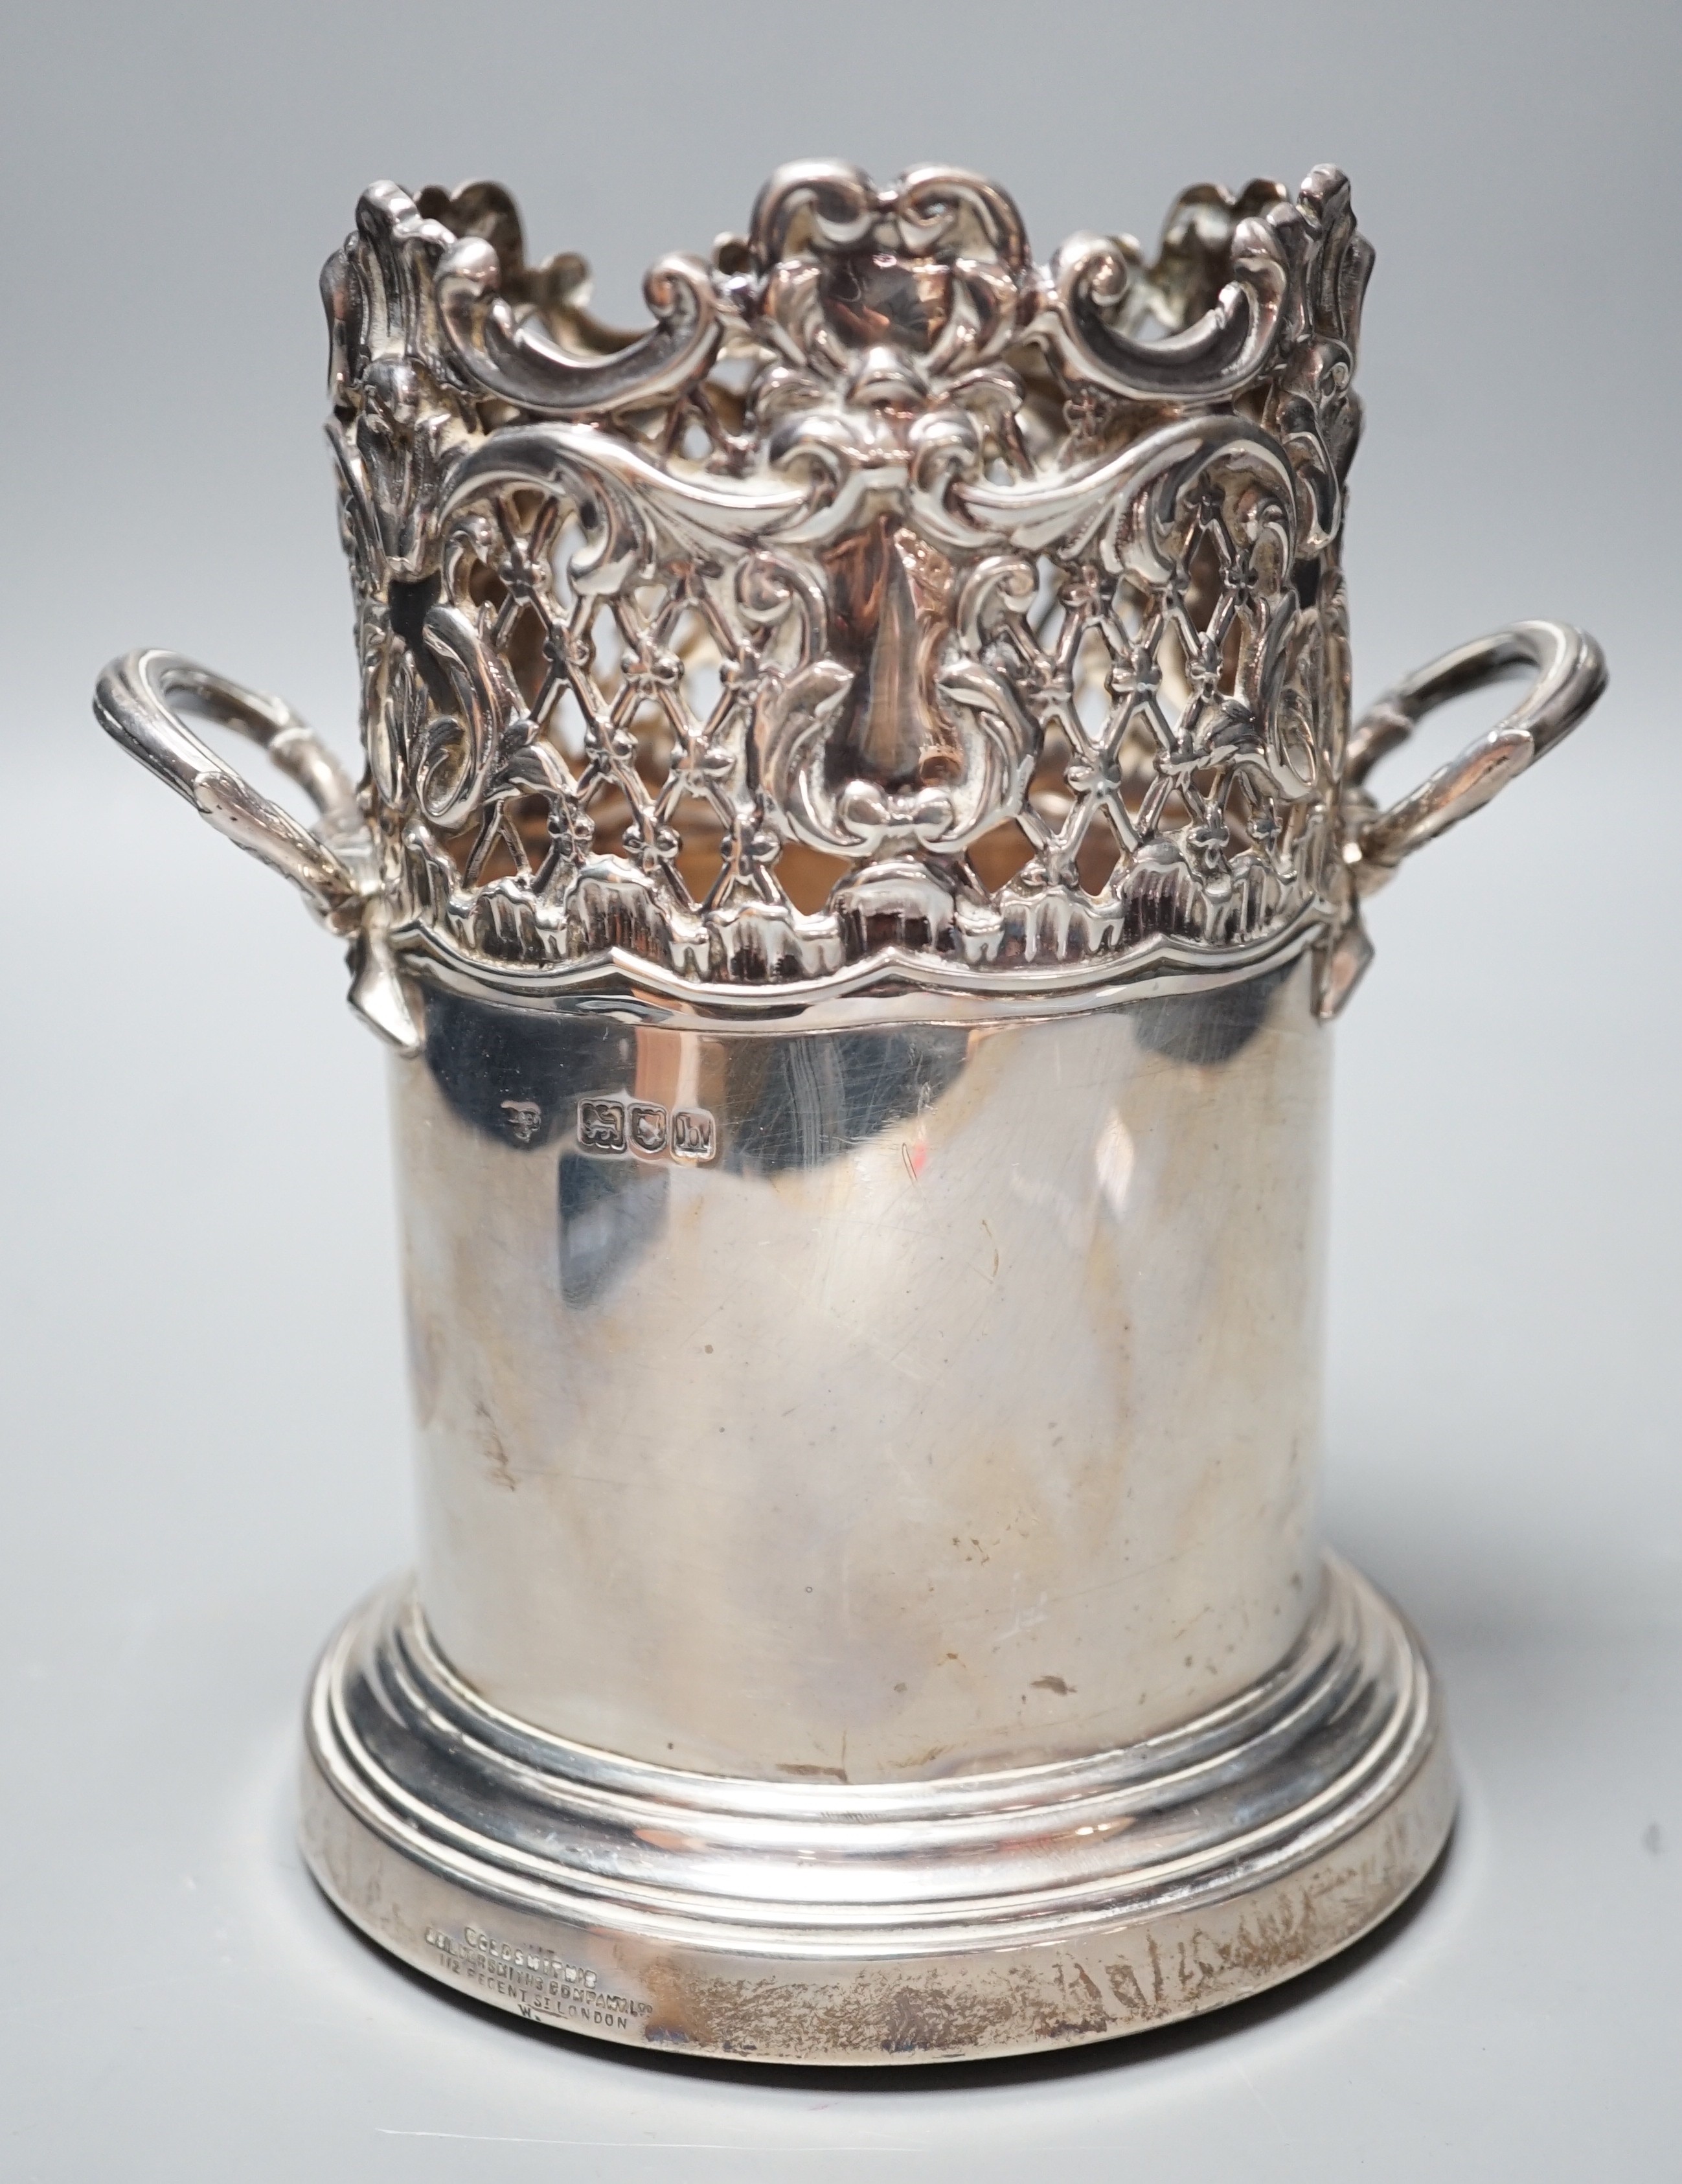 An Edwardian pierced silver mounted two handled syphon stand, by Goldsmiths & Silversmiths Co Ltd, London, 1903, 17.8cm, with turned wooden base.